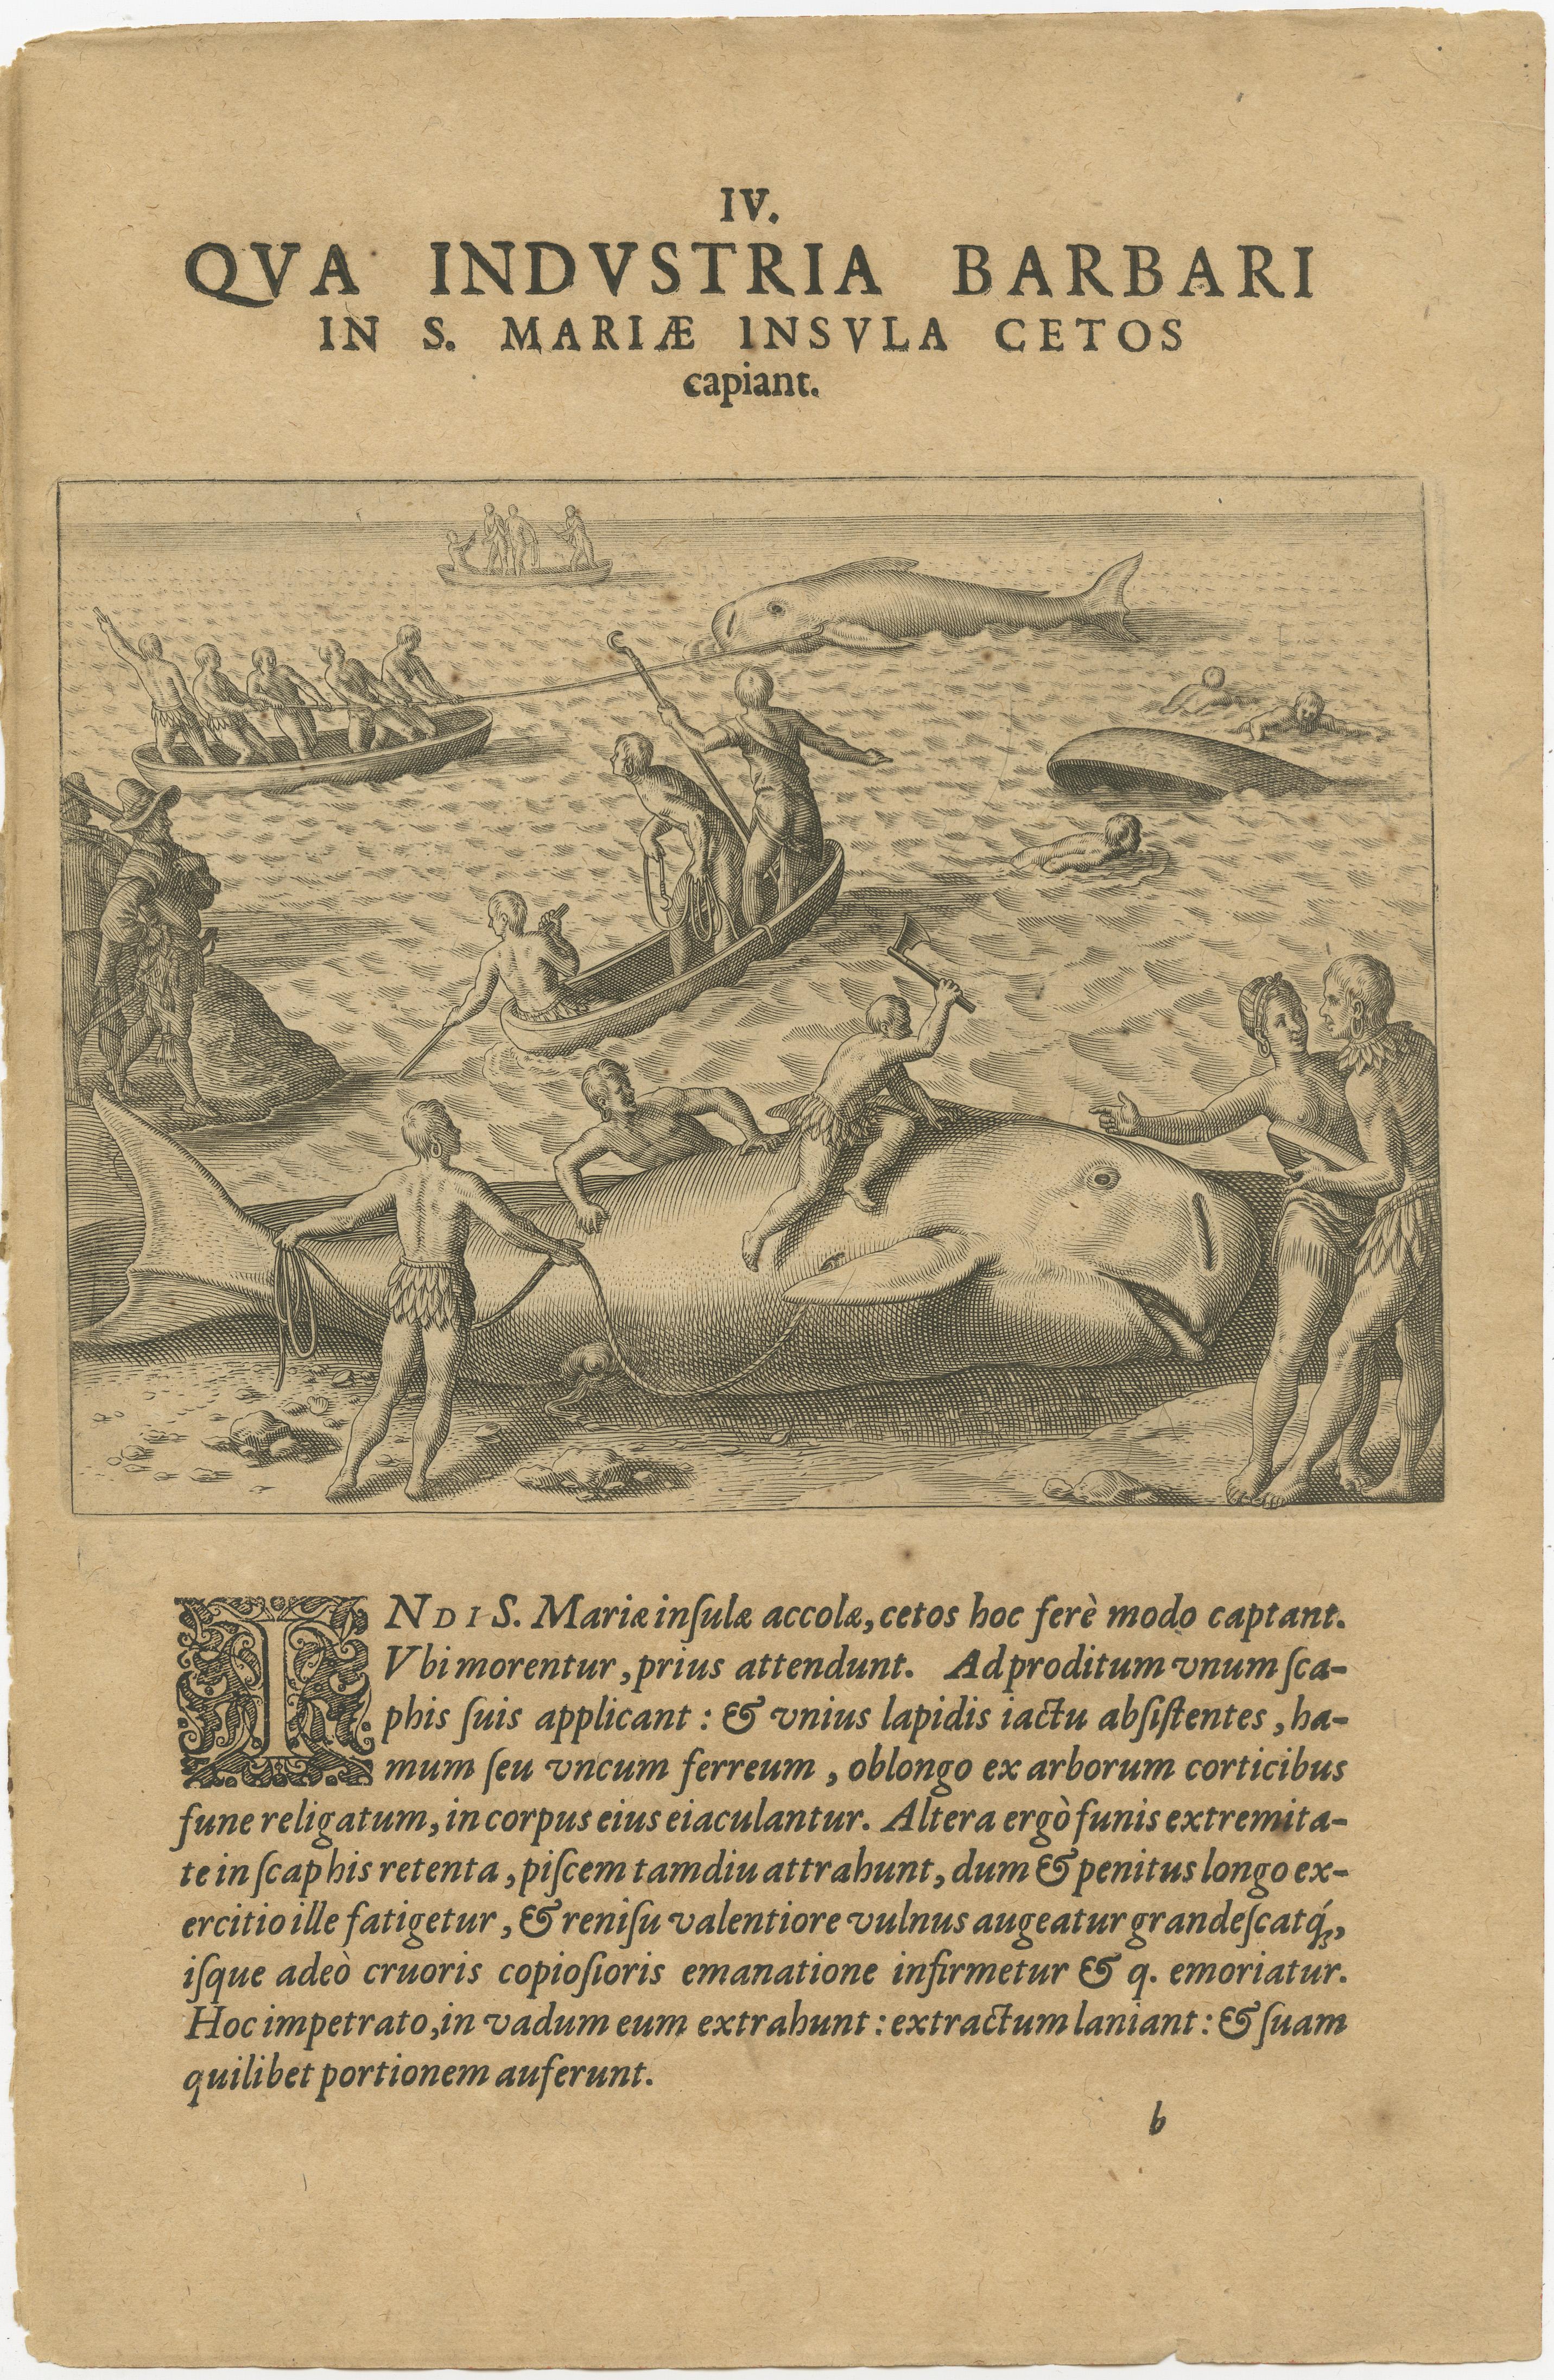 Paper The Whale Harvest of St. Mary's Island - Copper Engraving by de Bry, 1601 For Sale